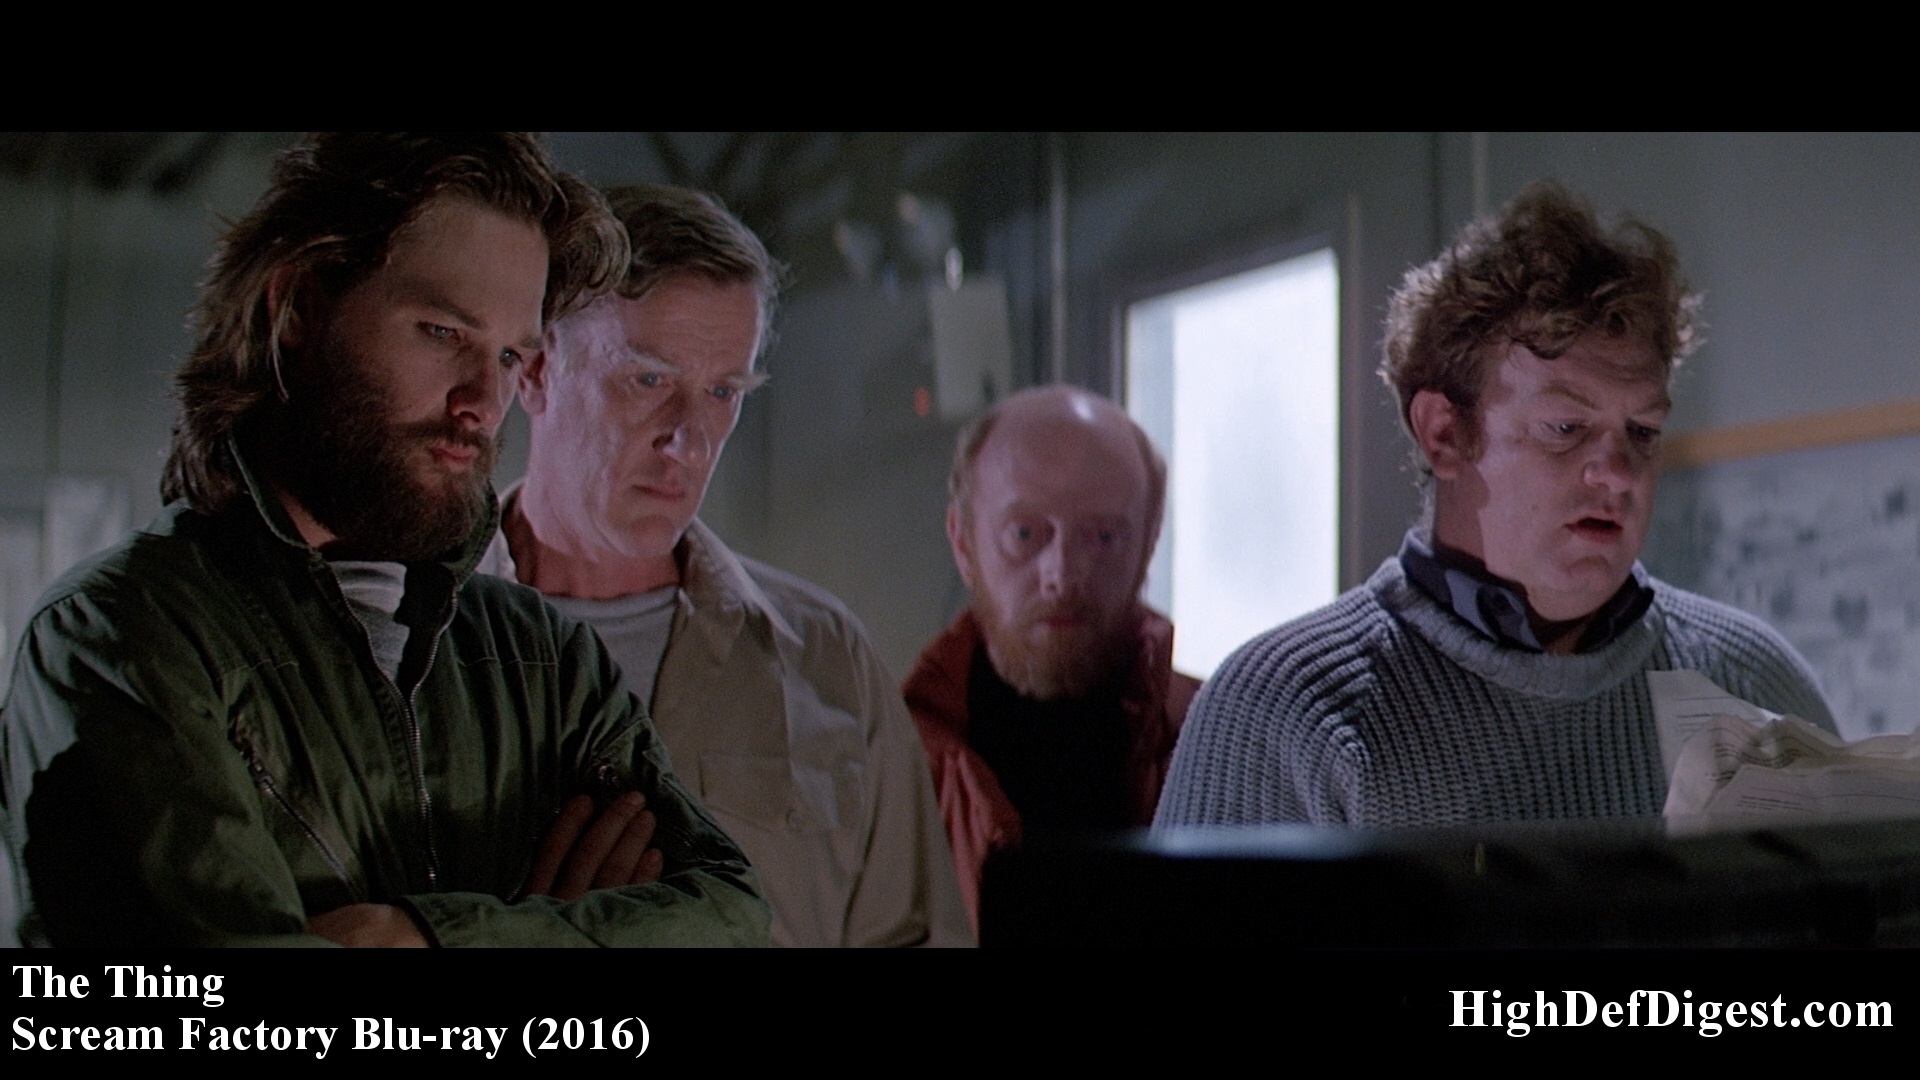 The Thing - The Crew (Scream Factory Blu-ray)